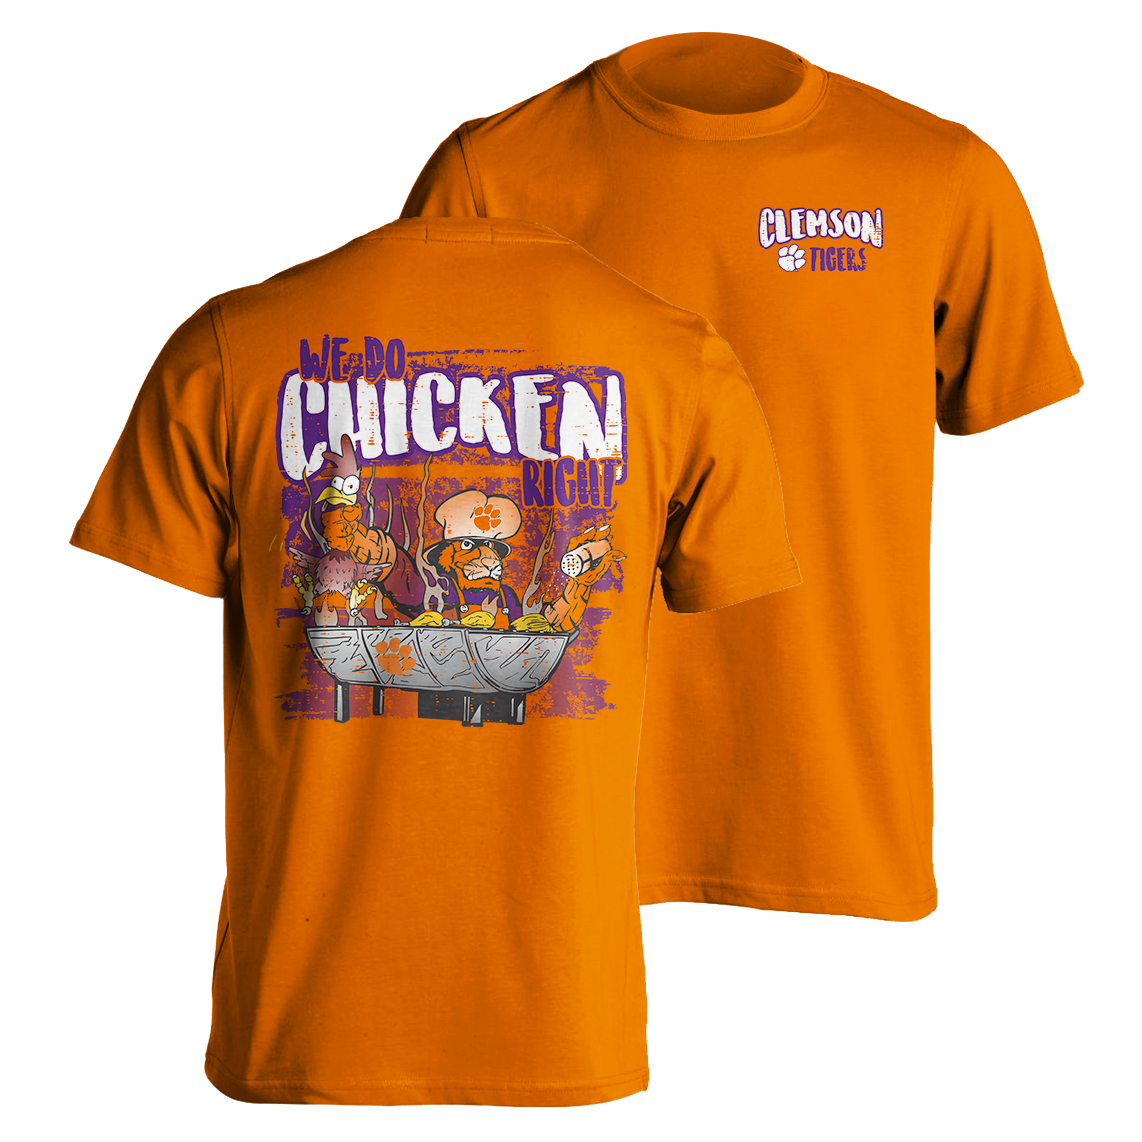 We Do Chicken Right T-shirt